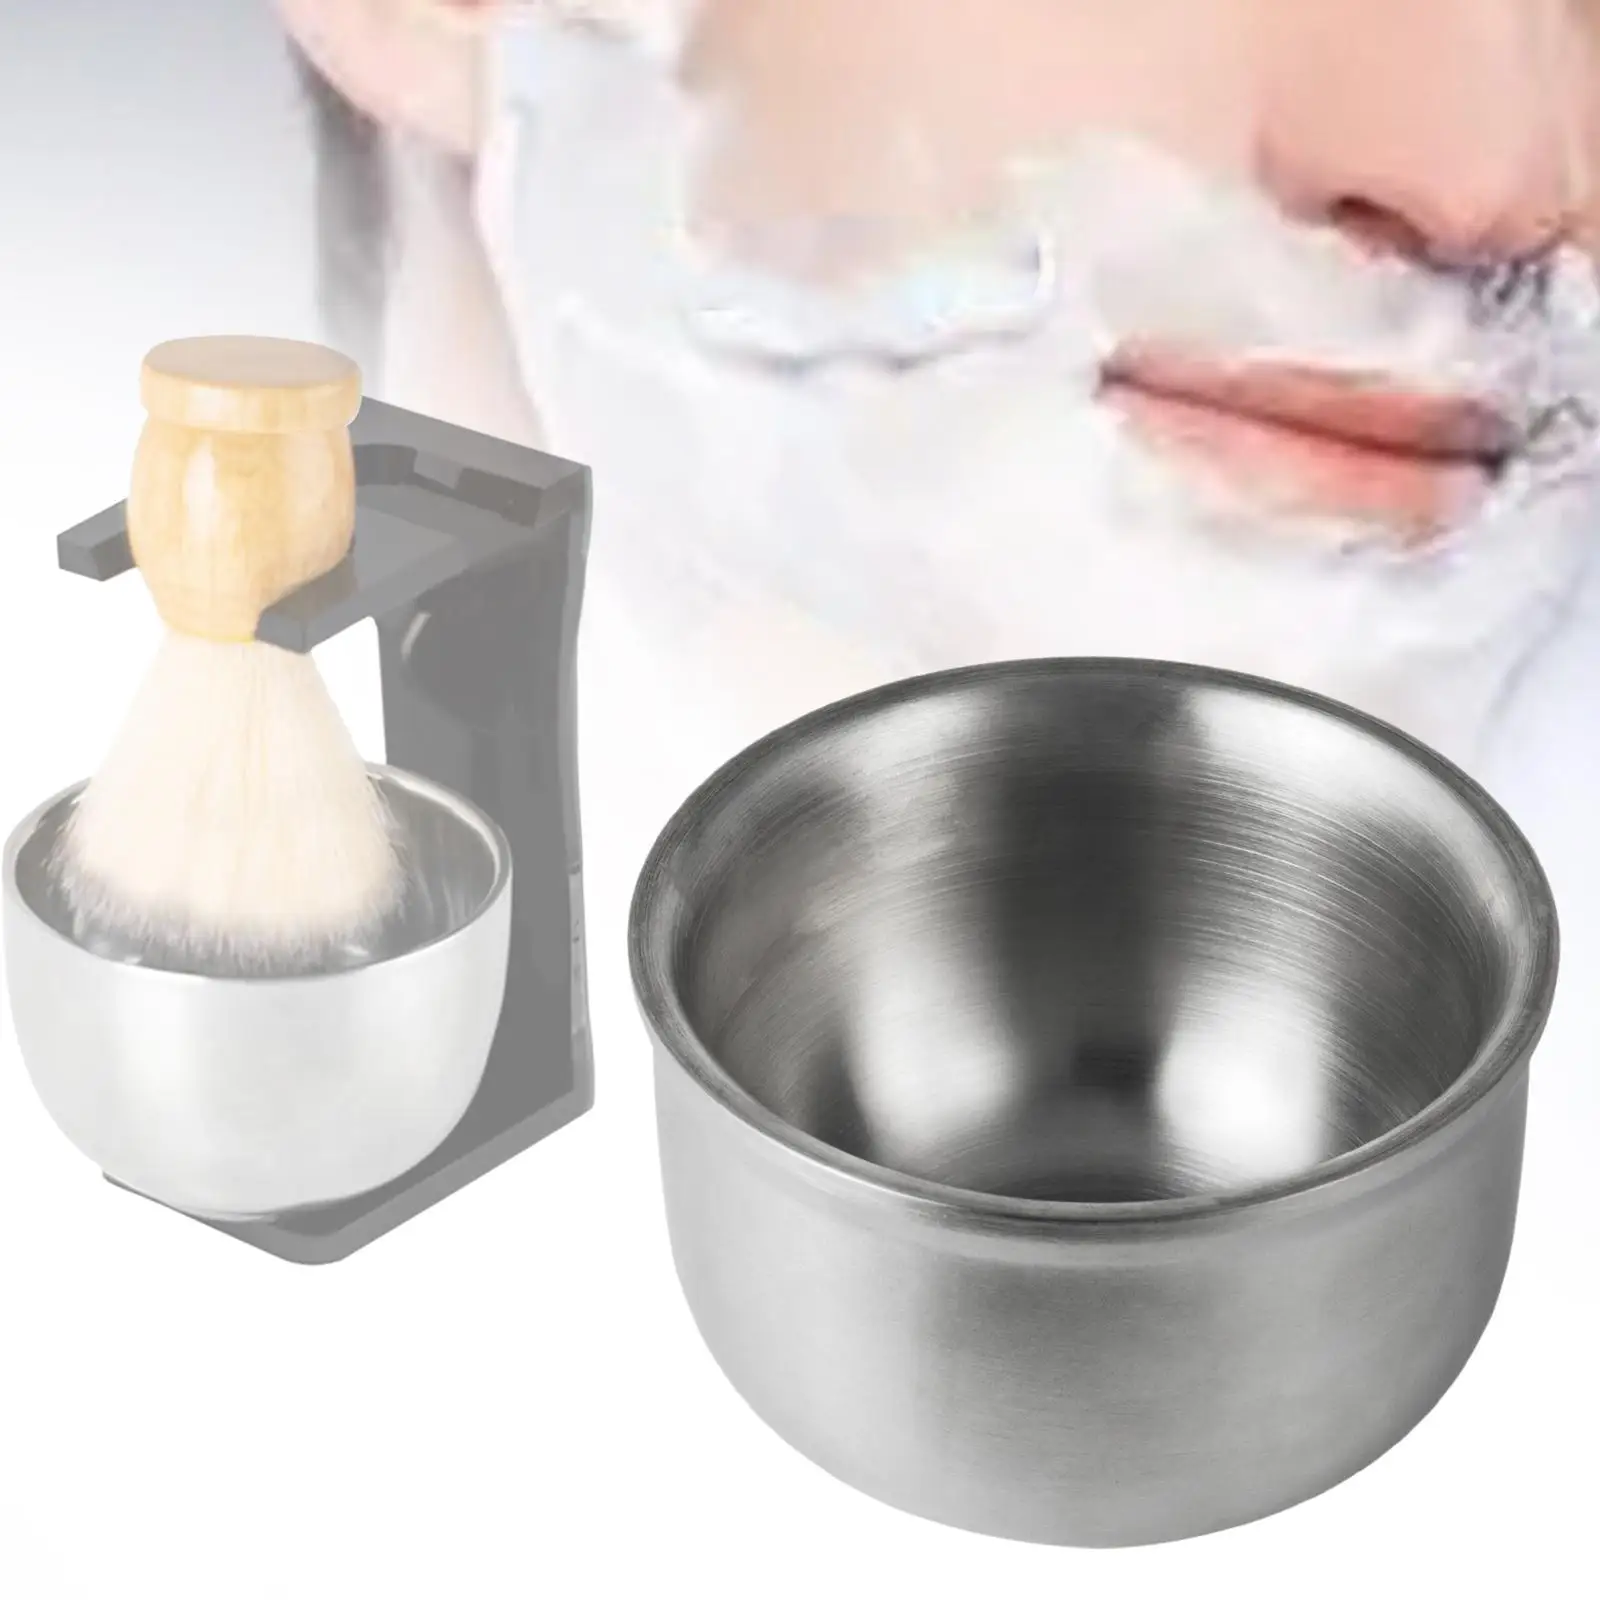 Shaving Bowl Small Smooth Easy to Lather Durable Fits Wet Shave Portable Stainless Steel Shave Cream and Soap Bowl for Gift Men